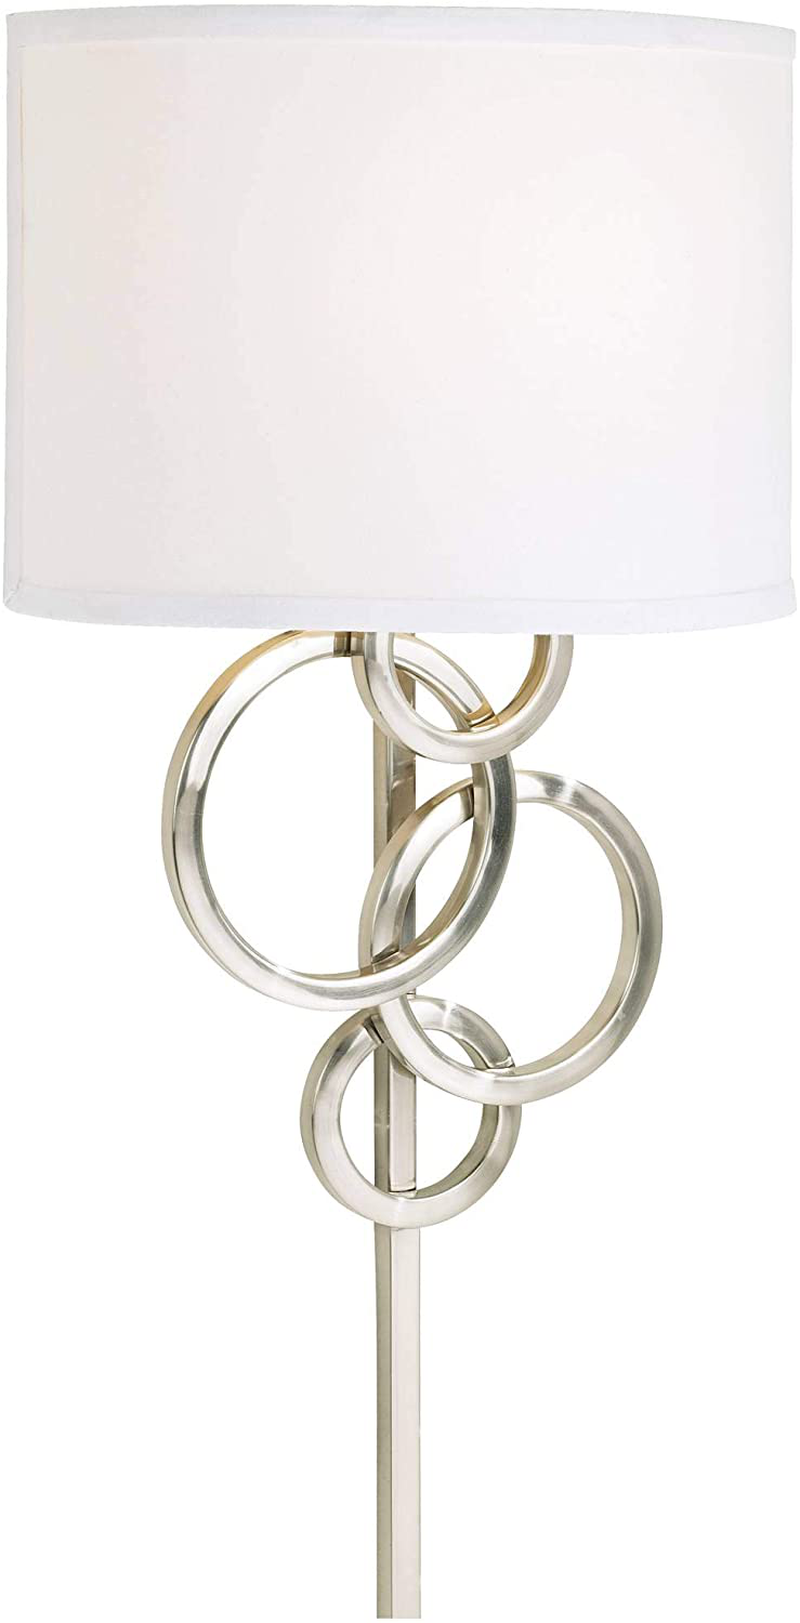 Circles Modern Indoor Wall Mount Lamp Brushed Nickel Silver Plug-In Light Fixture off White Cotton Half Shade for Bedroom Bedside House Reading Living Room Home Hallway Dining - Possini Euro Design Home & Garden > Lighting > Lighting Fixtures > Wall Light Fixtures KOL DEALS   